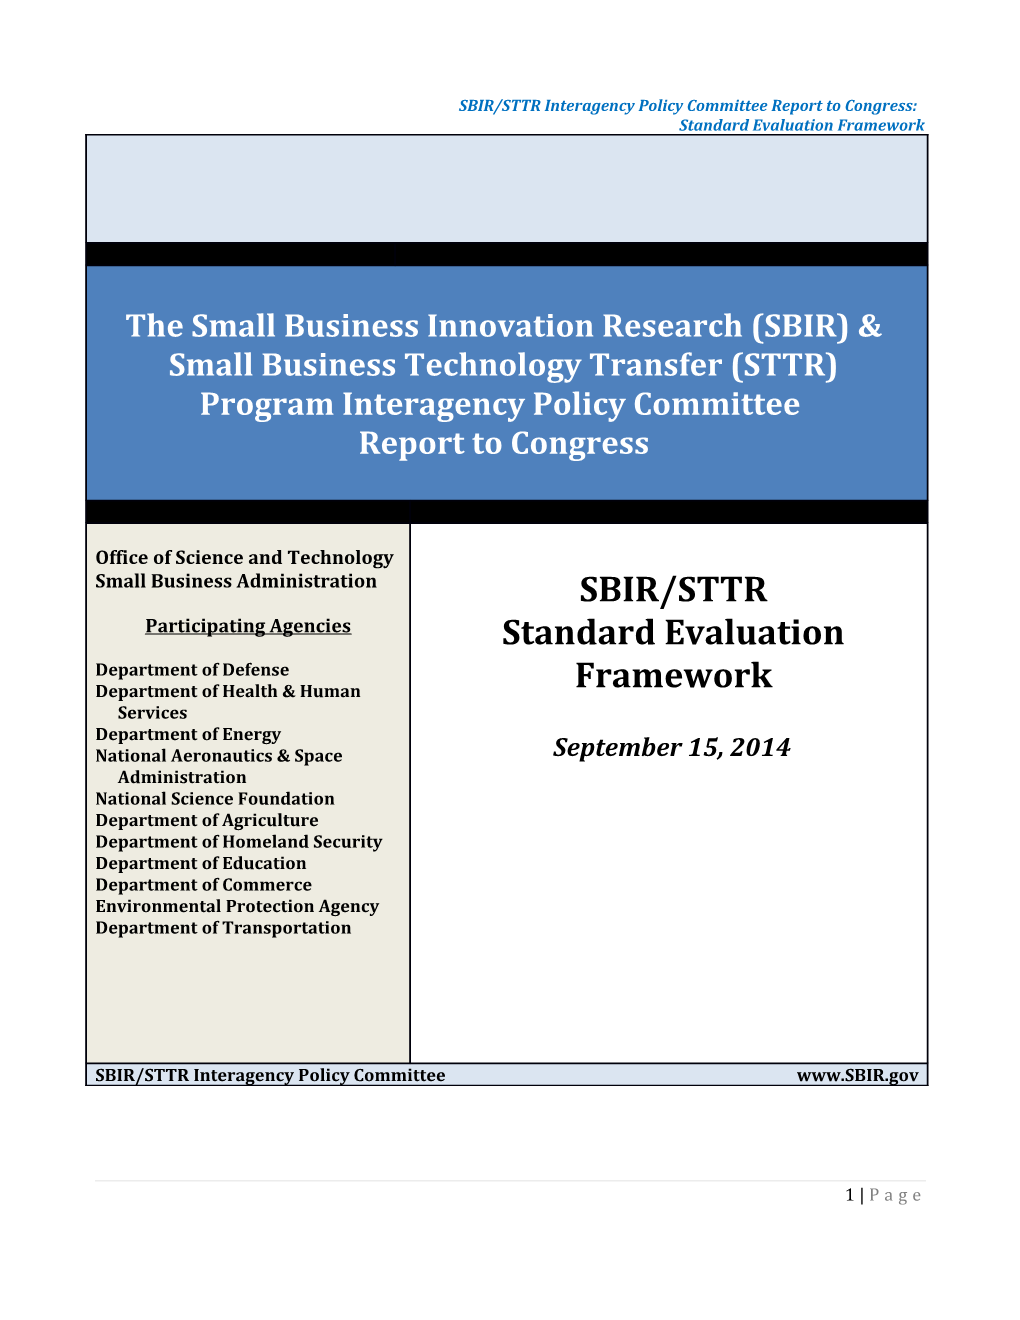 SBIR/STTR Interagency Policy Committee Report to Congress